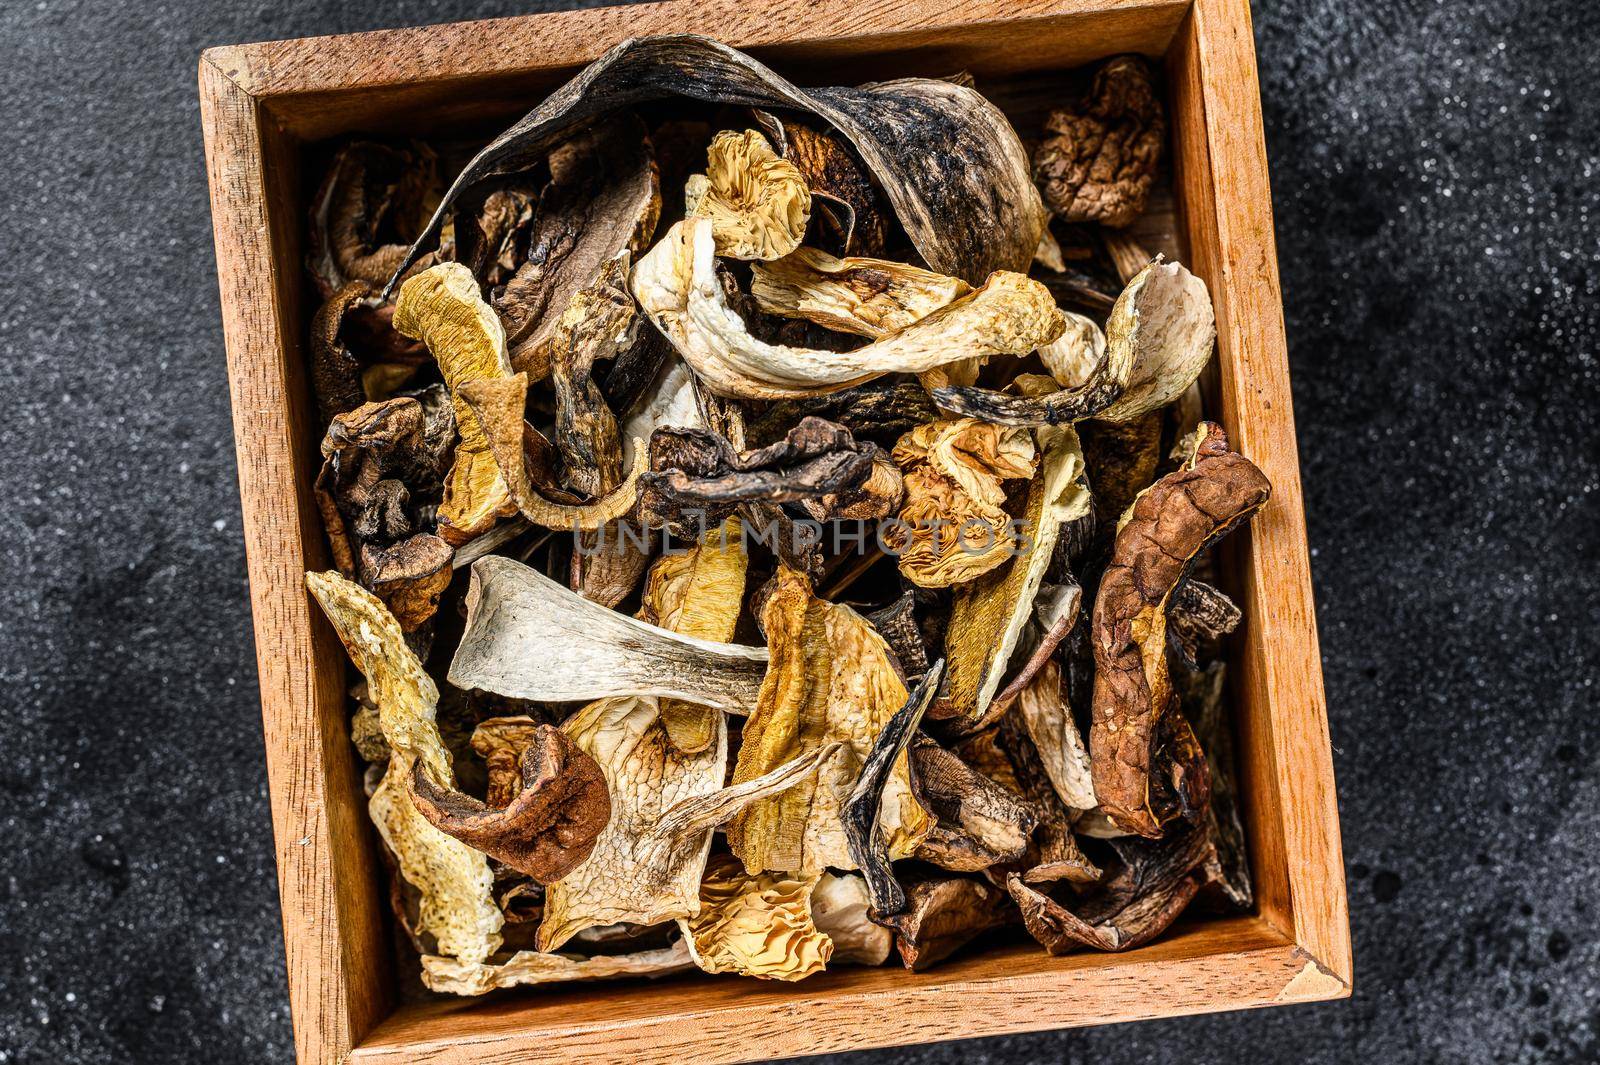 Boletus wild dried mushrooms in a wooden box. Black background. Top view by Composter